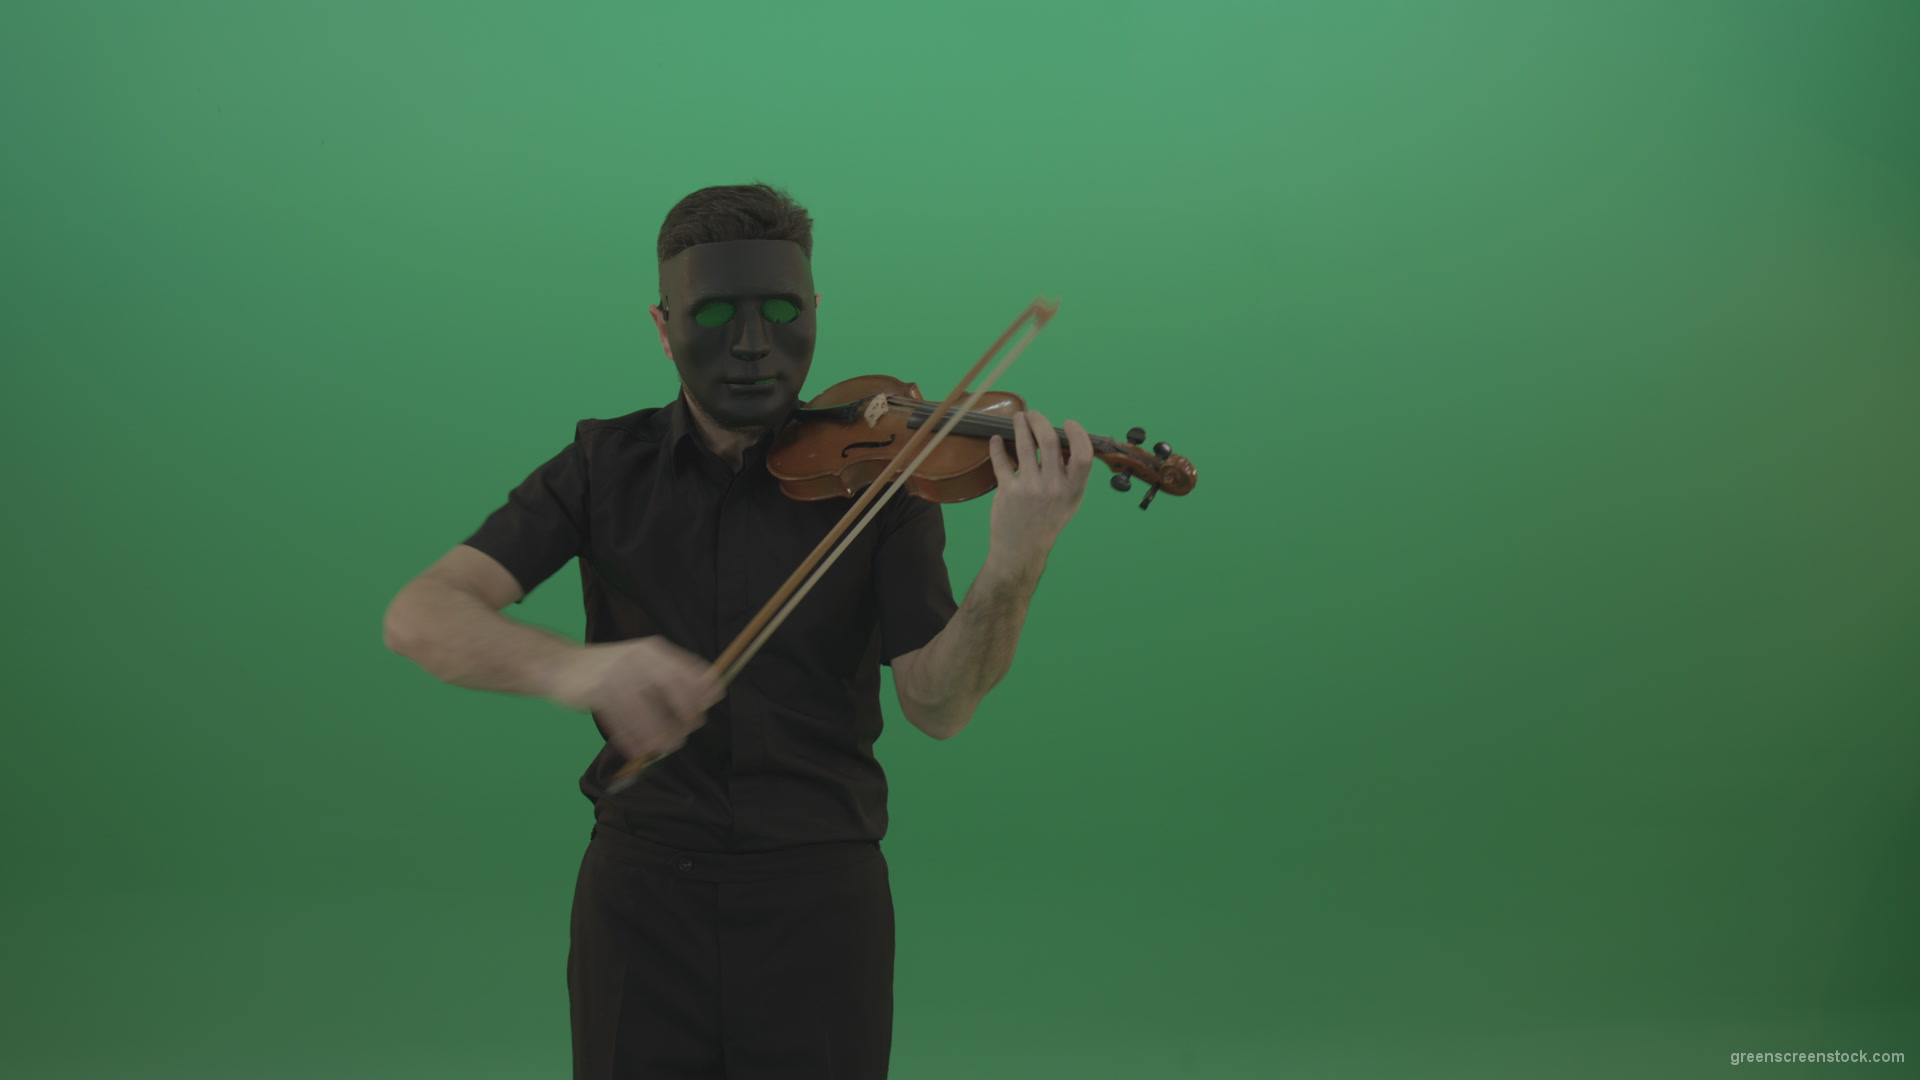 Man-in-black-shirt-and-mask-fast-play-violin-fiddle-strings-gothic-music-isolated-on-green-screen_006 Green Screen Stock